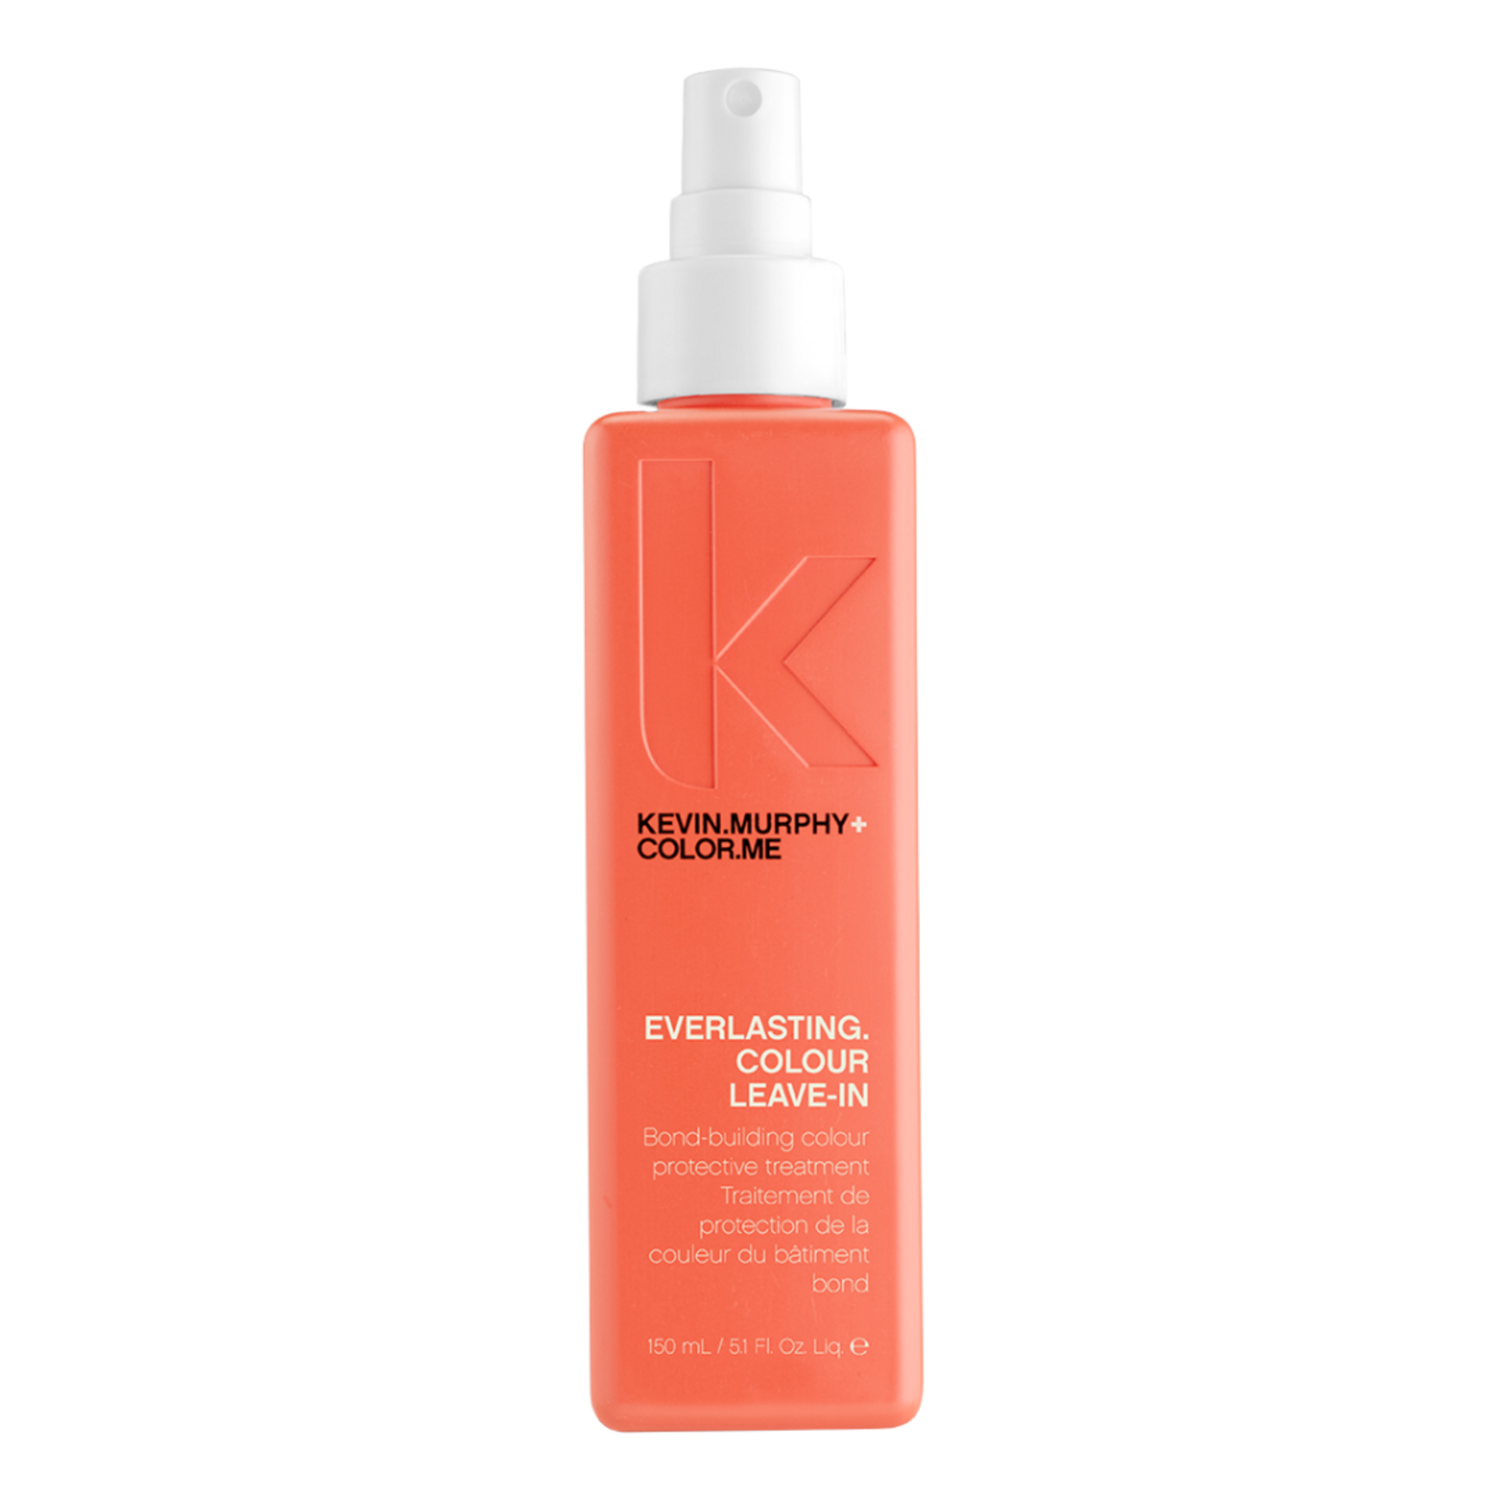 Kevin Murphy EVERLASTING COLOUR LEAVE IN 150 ml